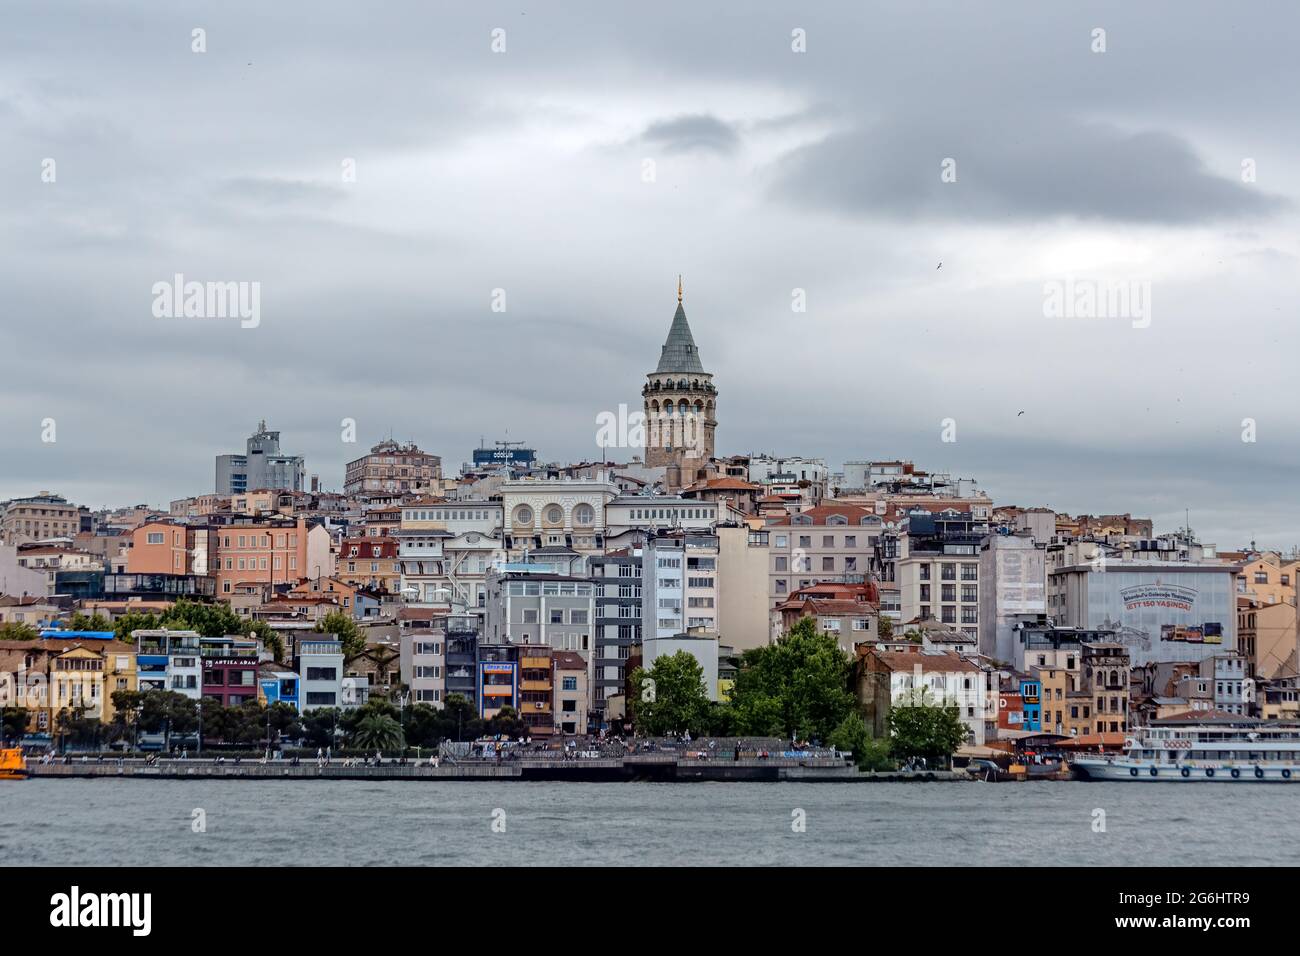 Galata Tower within residential buildings in old town. Karakoy coastal view from Bosporus. Sea and Golden Horn on a cloudy day. Stock Photo